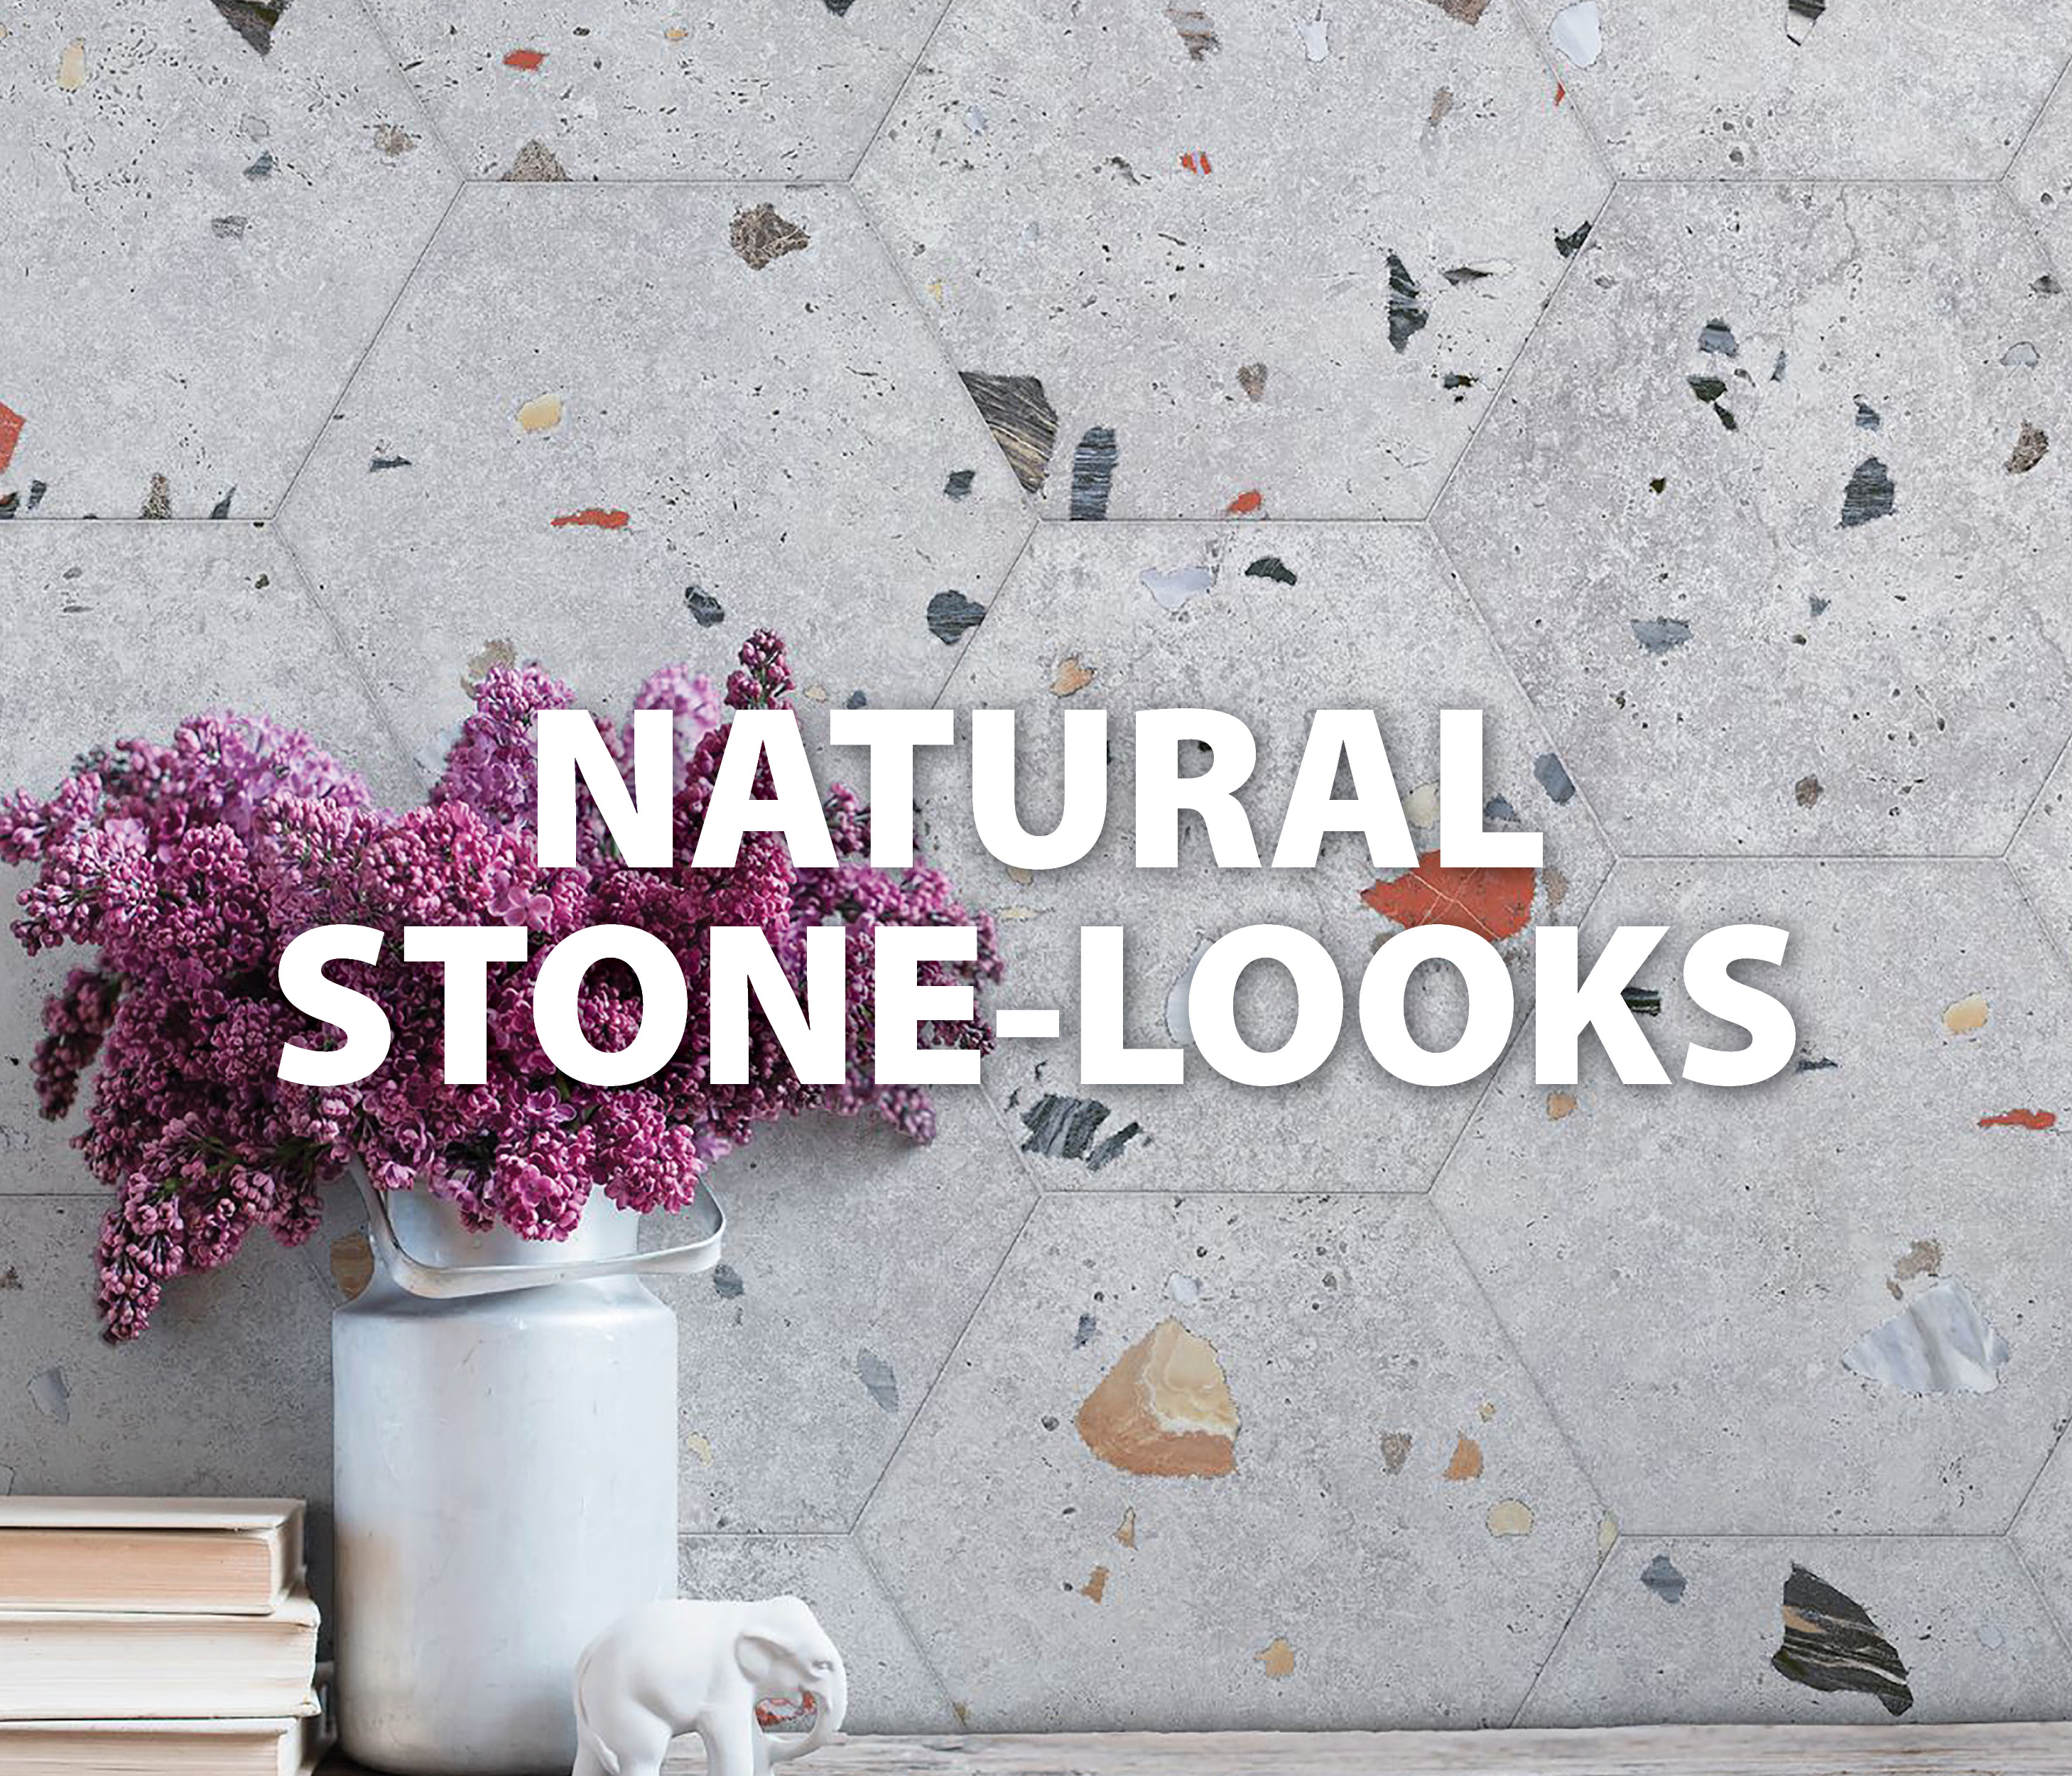 natural stone looks